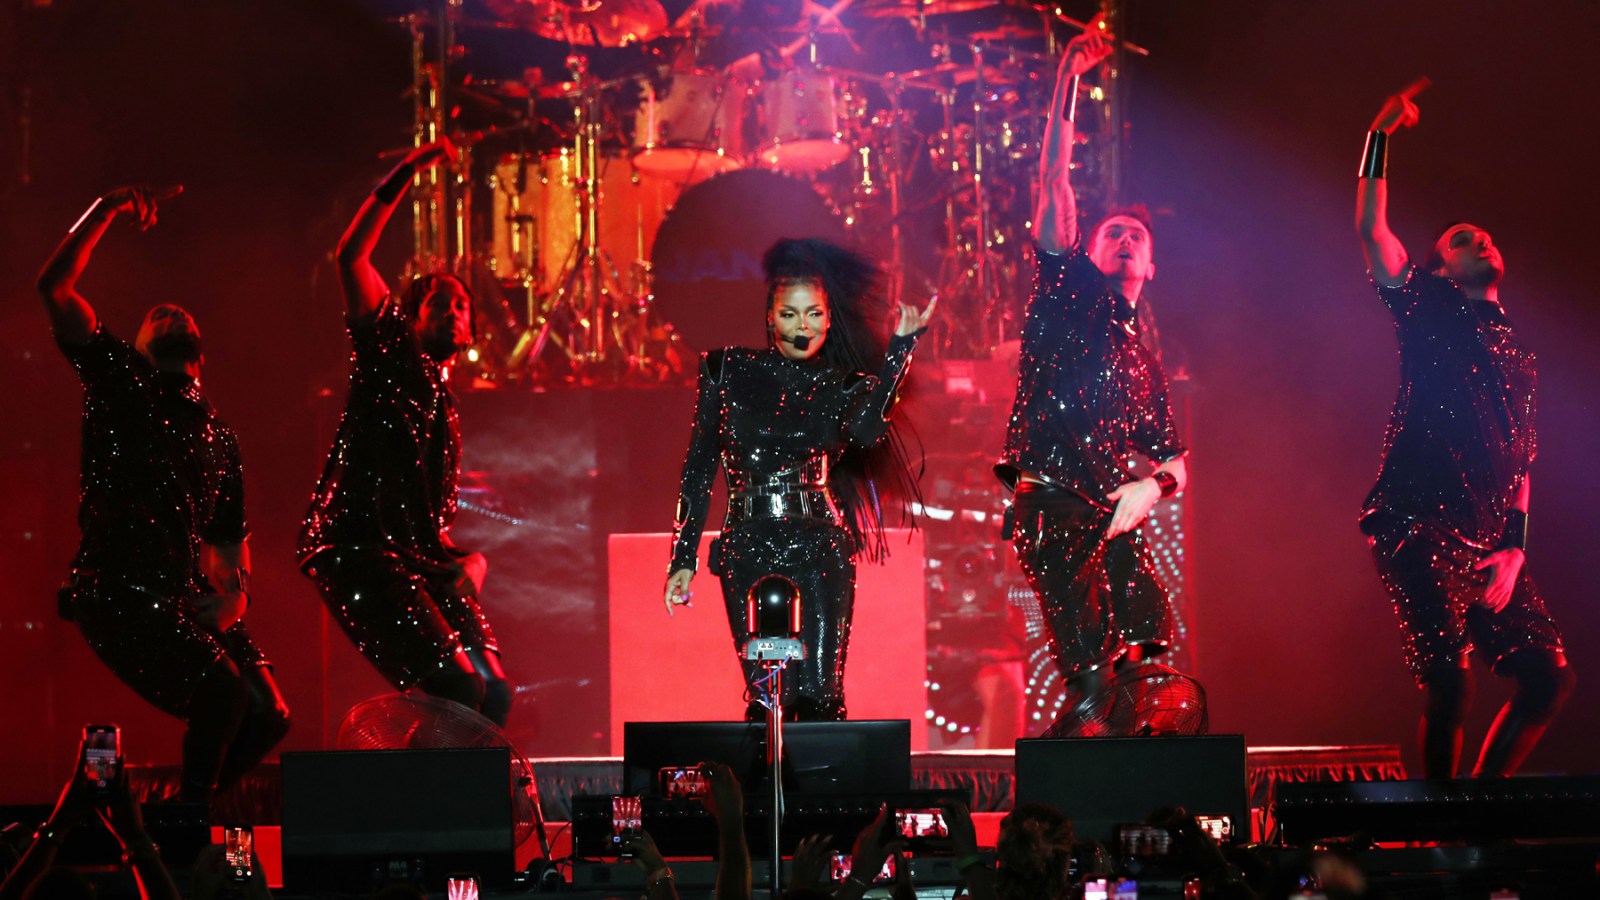 Live Nation Launches $25 All-In Tickets Deal for Over 900 Acts like Janet Jackson, 21 Savage, Peso Pluma